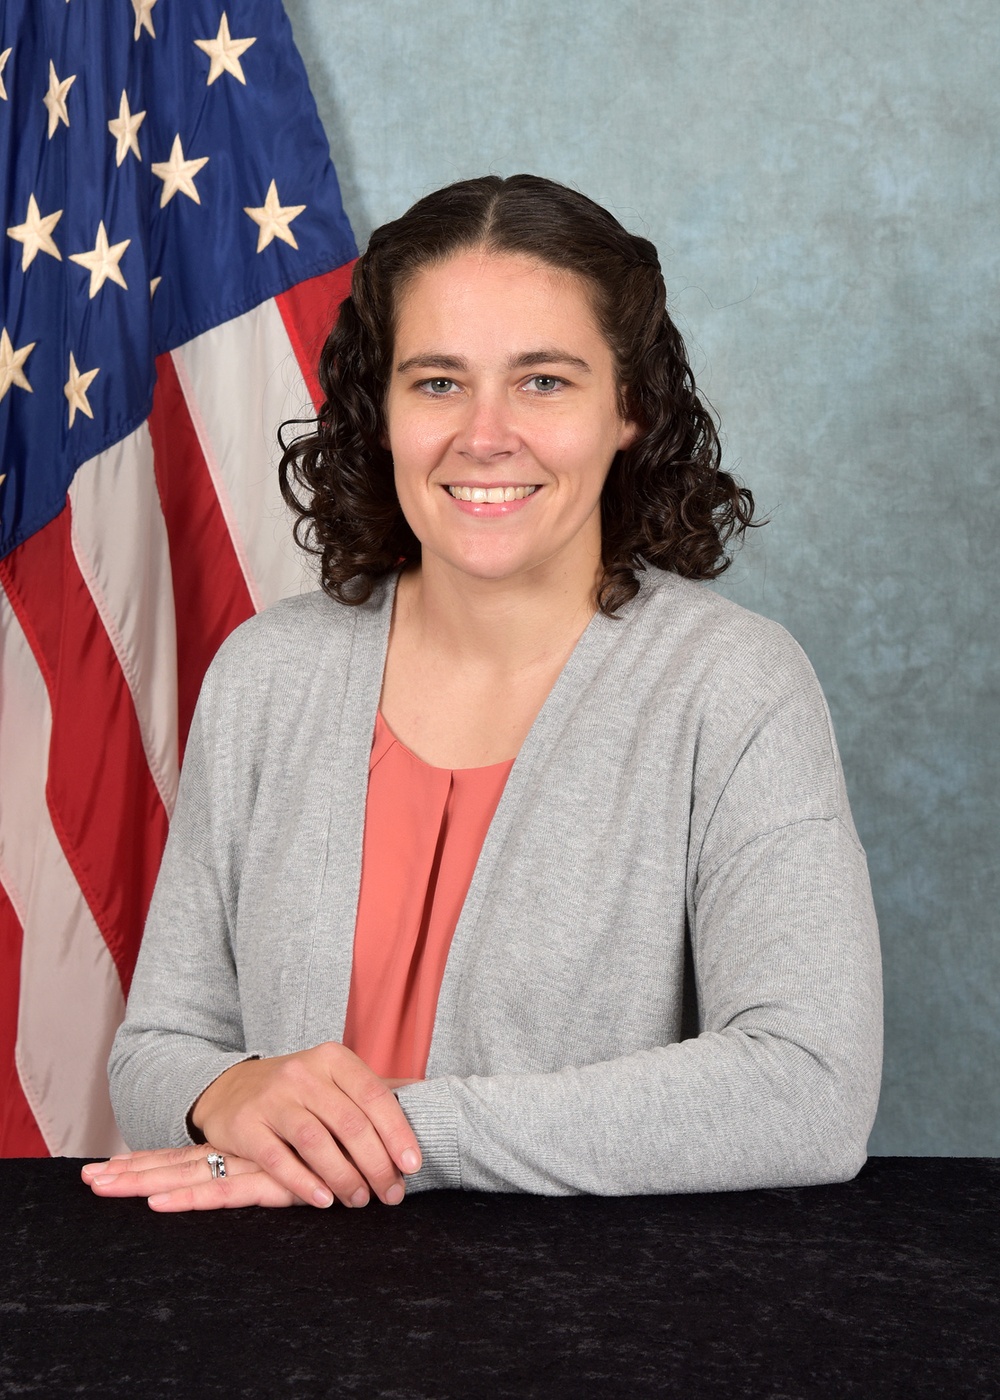 NAVFAC Announces Project Manager of the Year